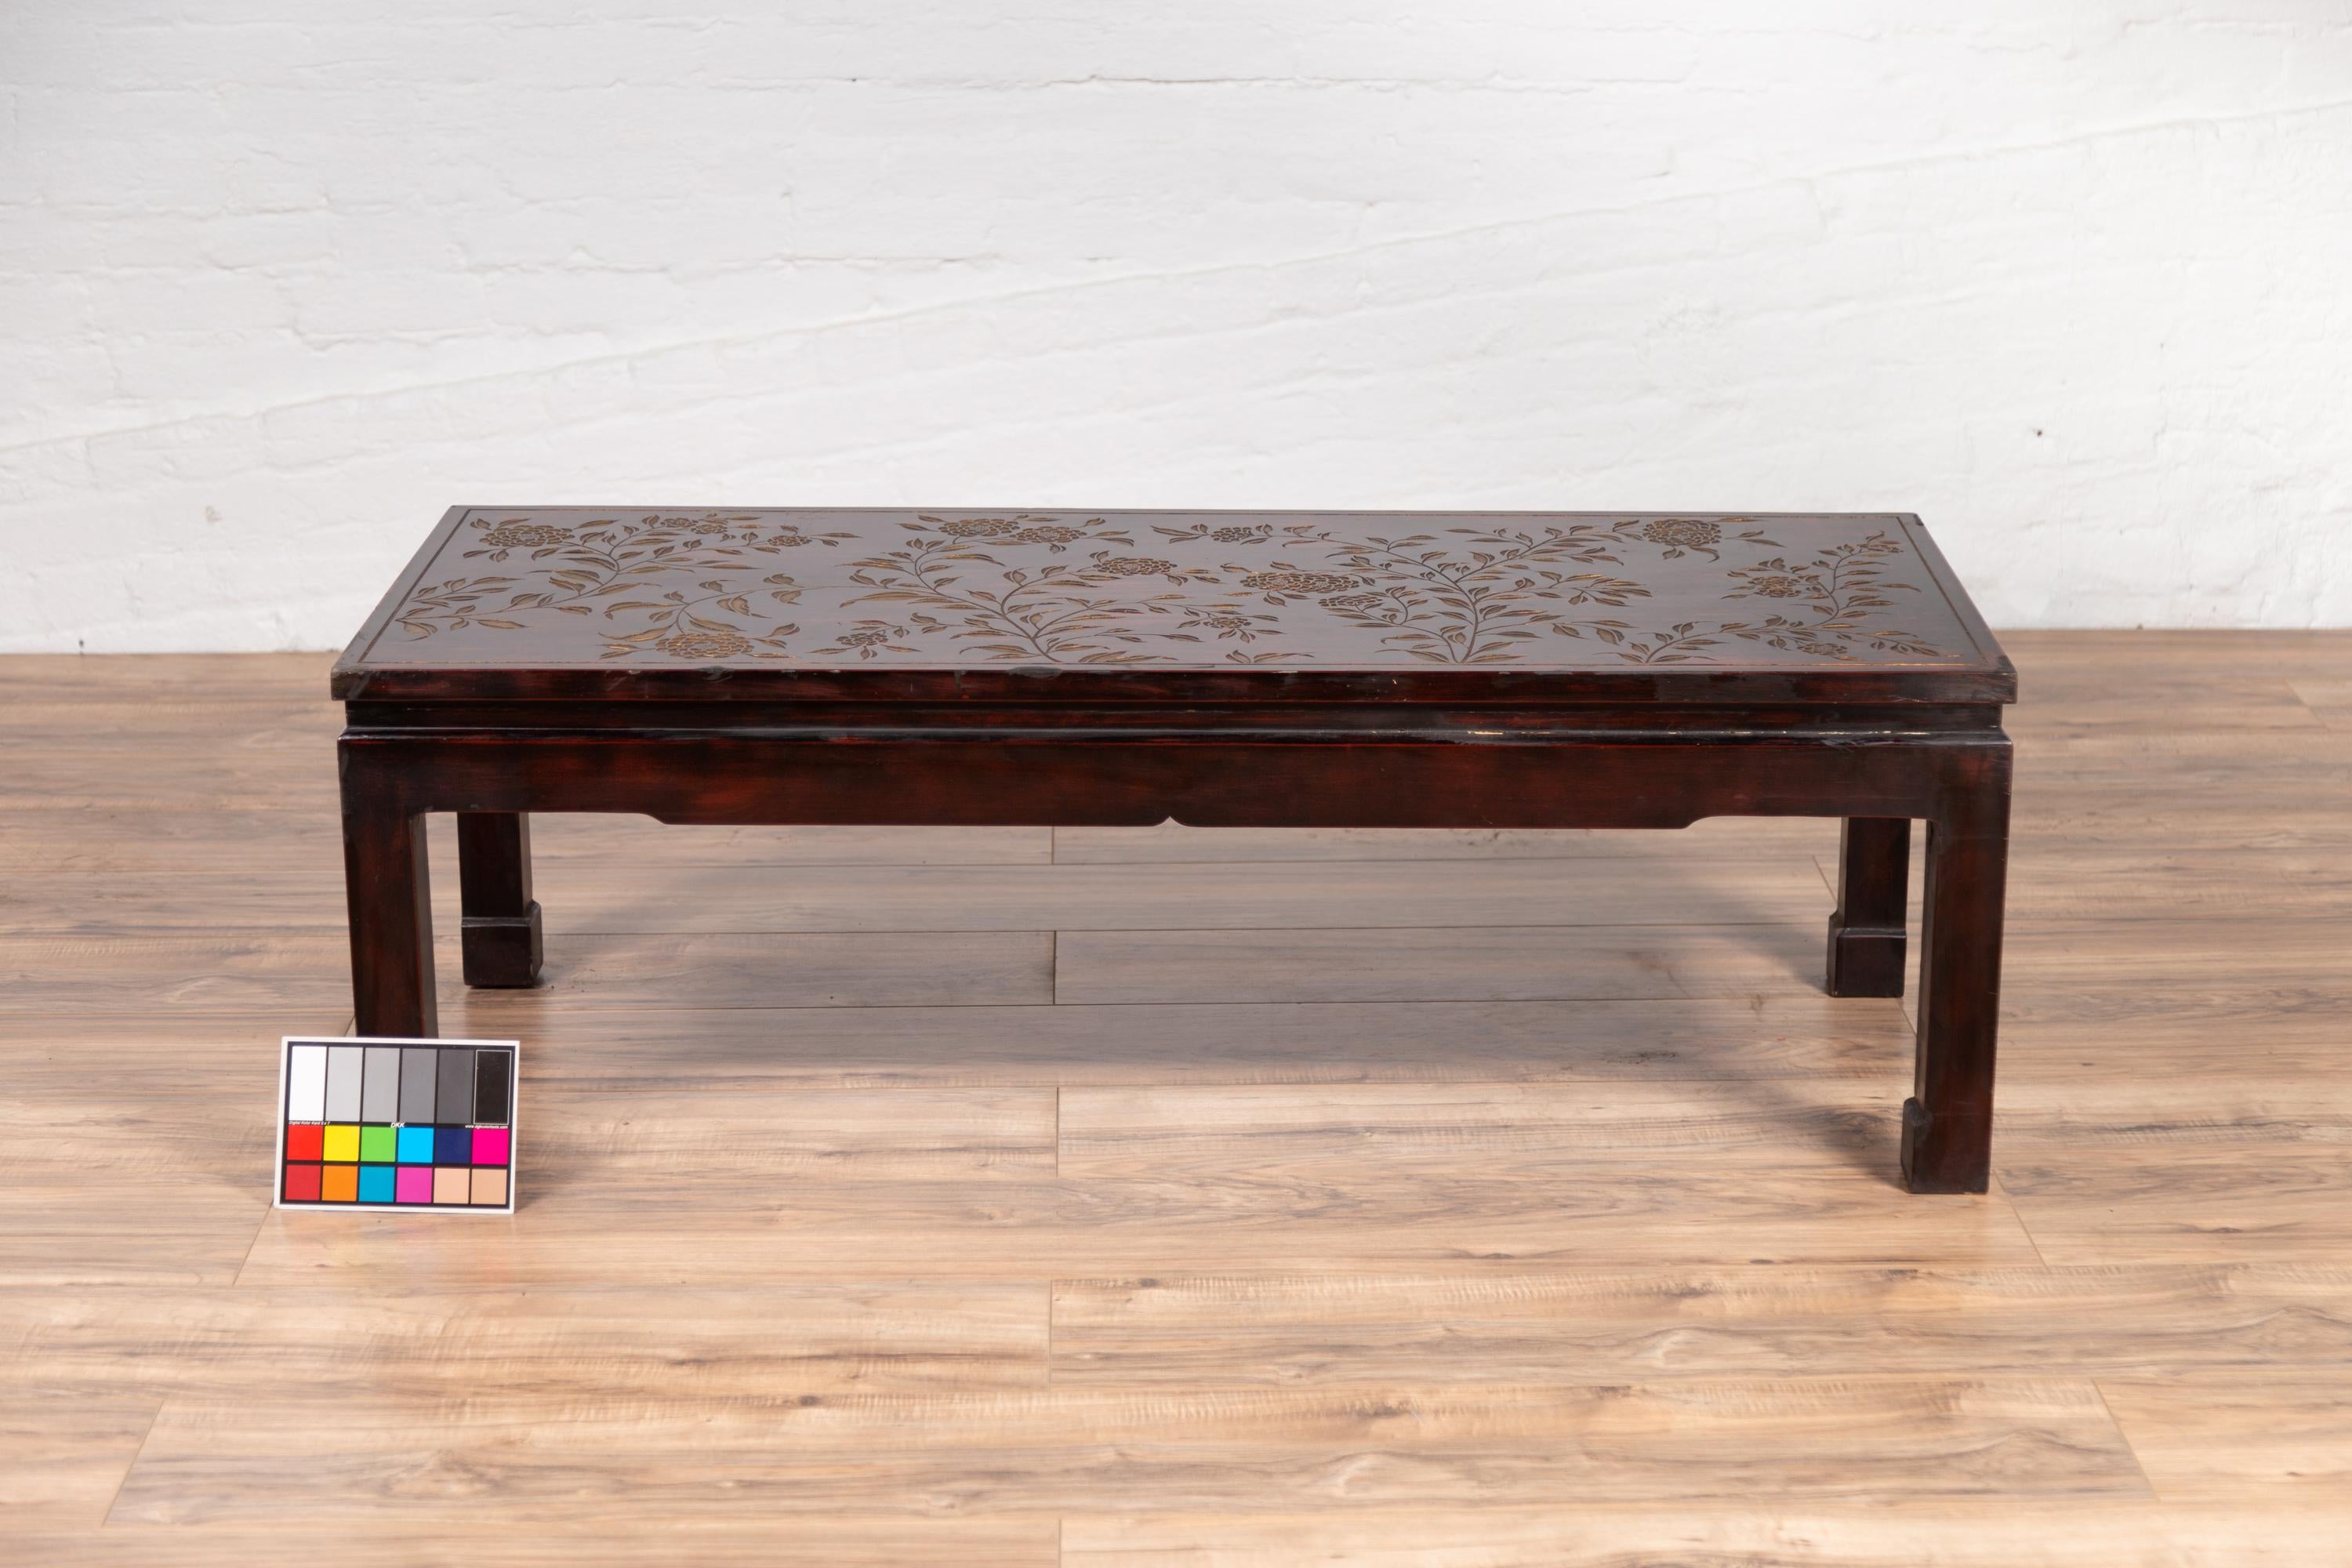 Vintage Chinese Lacquered Coffee Table with Carved and Gilt Floral Décor For Sale 9